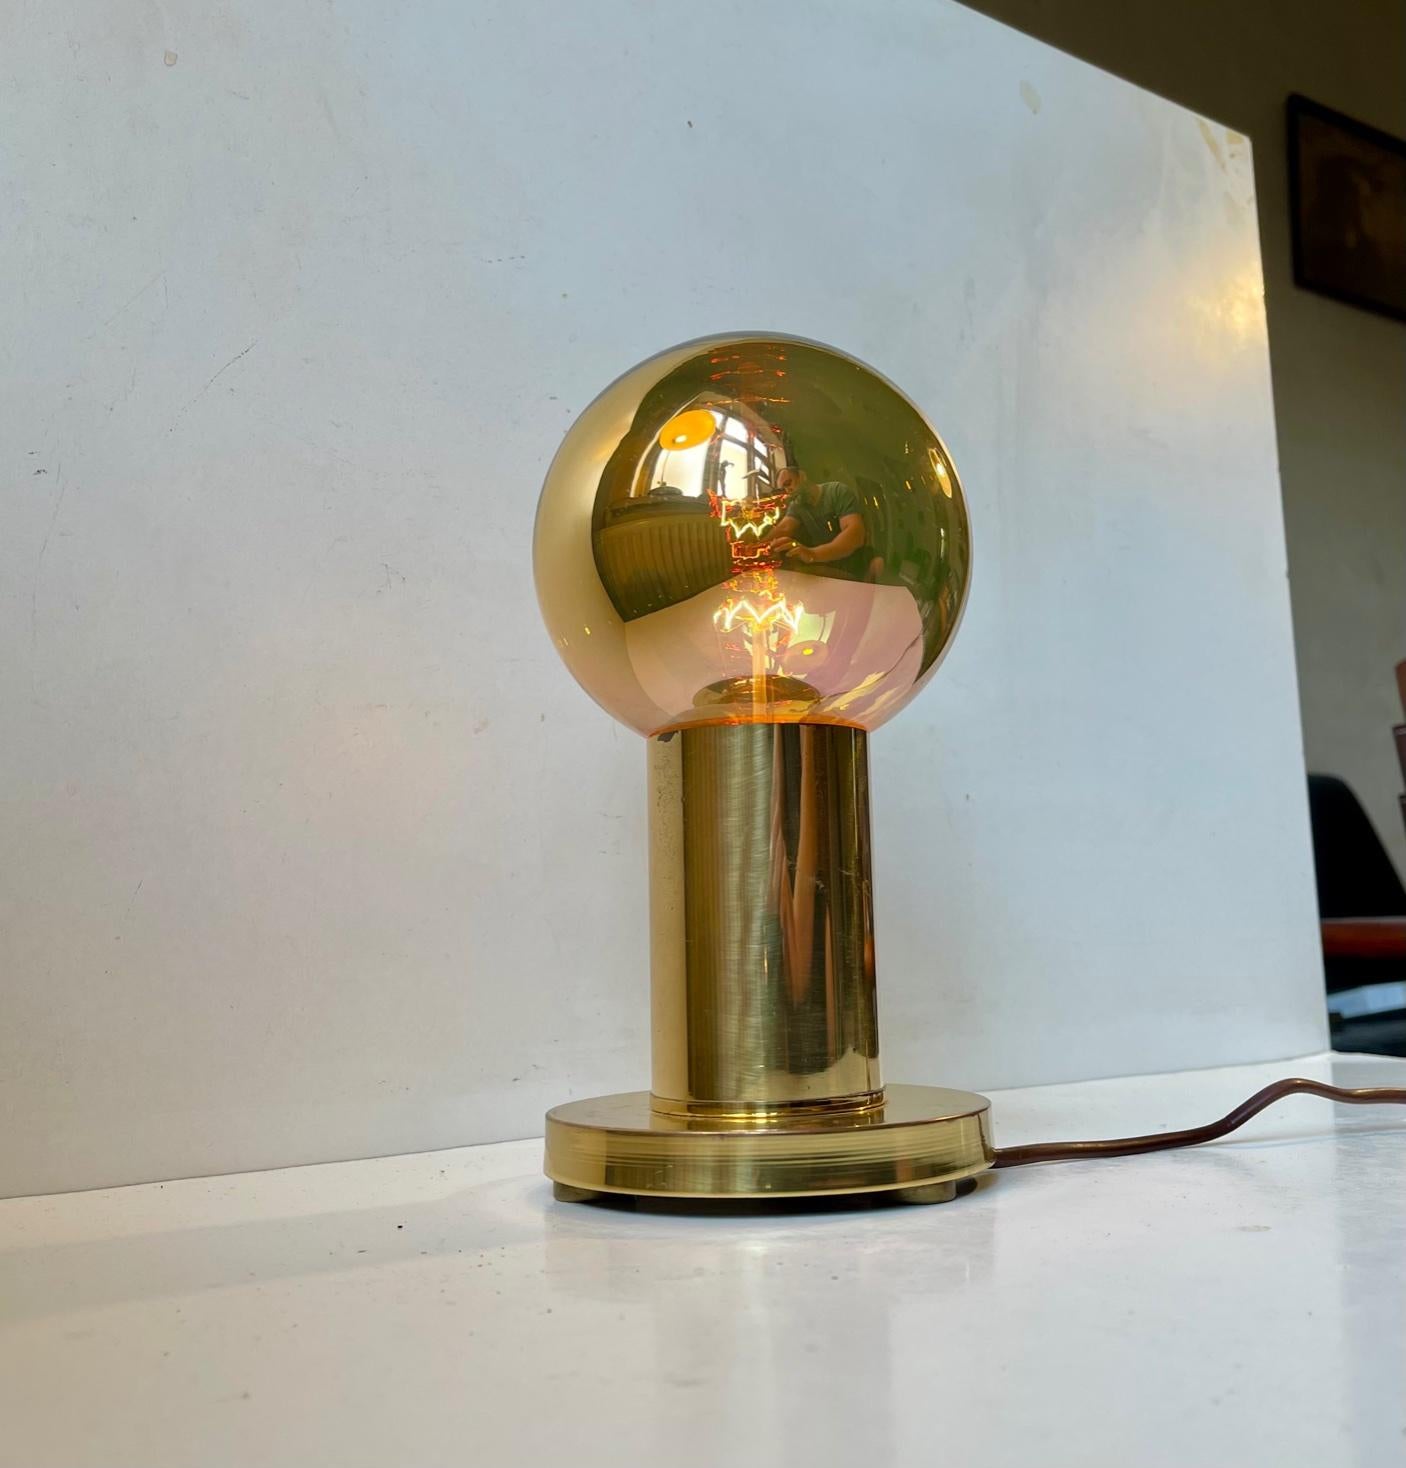 Frimann table light with original golden everlasting mirror/spy bulb. Everlasting? Well these bulbs were discontinued in the 1970s so it has been working for 50 years. Please notice that the light of this type of bulb is not meant to lid up the room